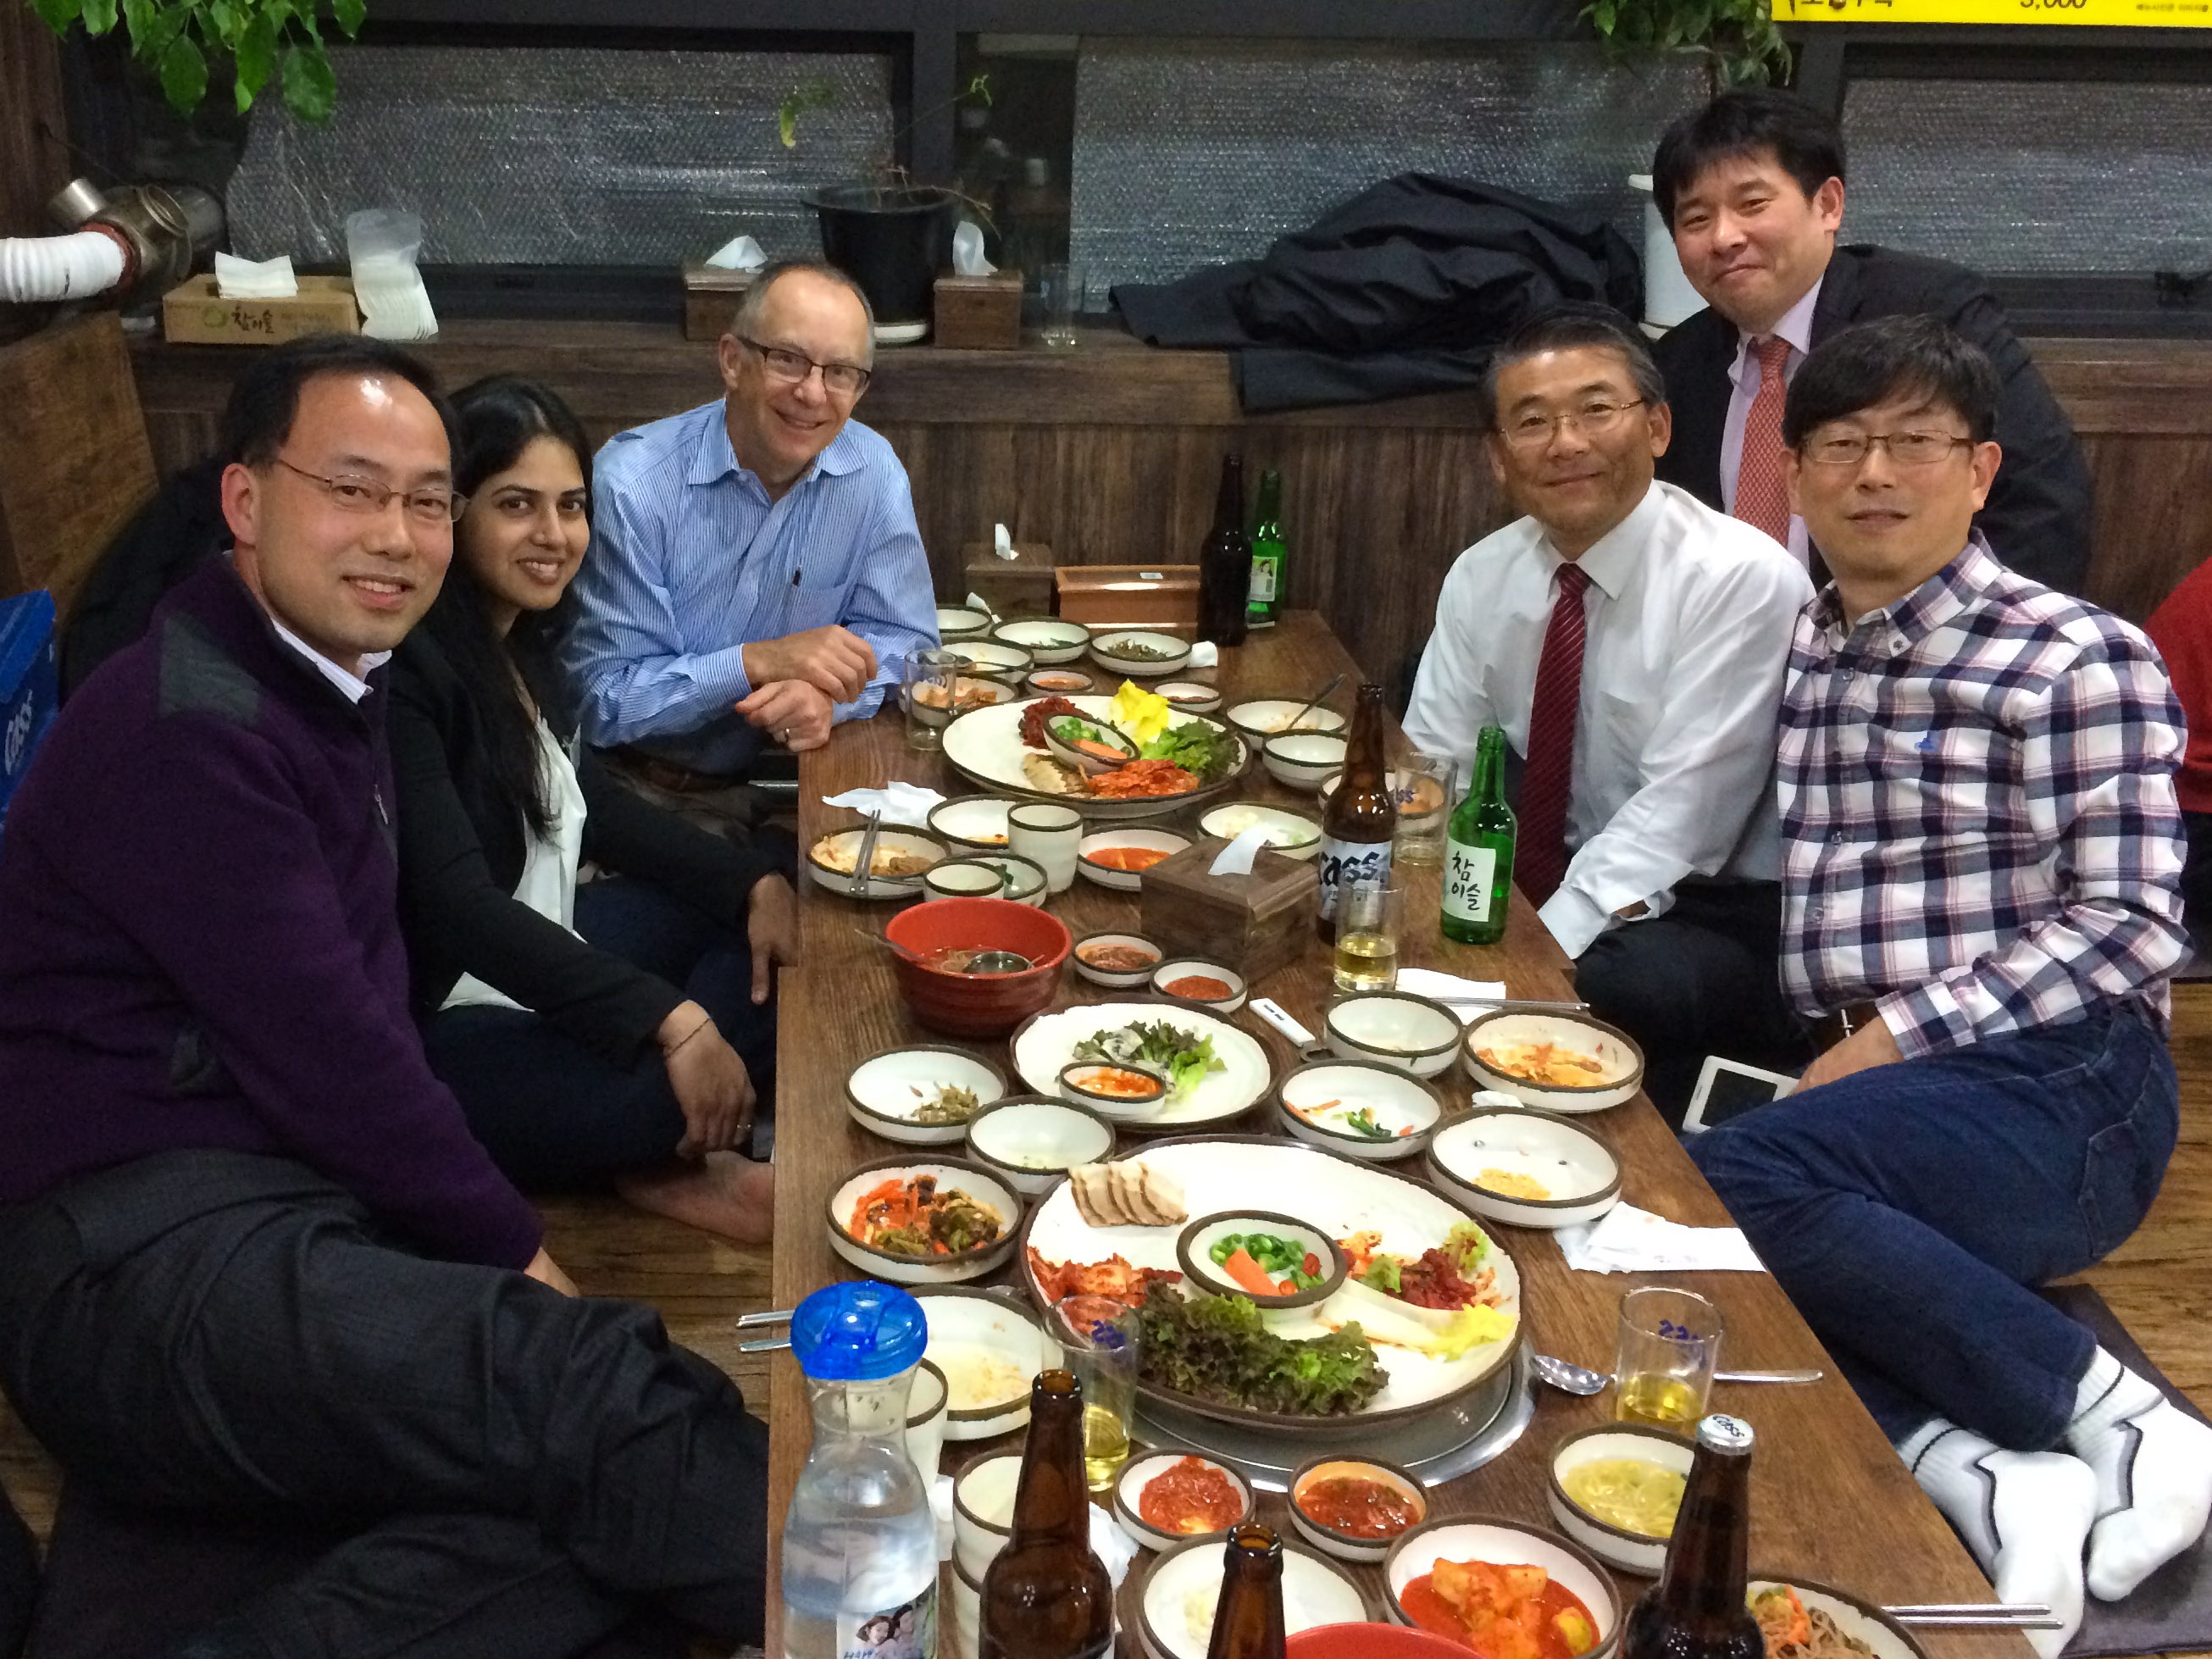 Dinner after OVNC with Dr. Won-Ki Hong, Victor